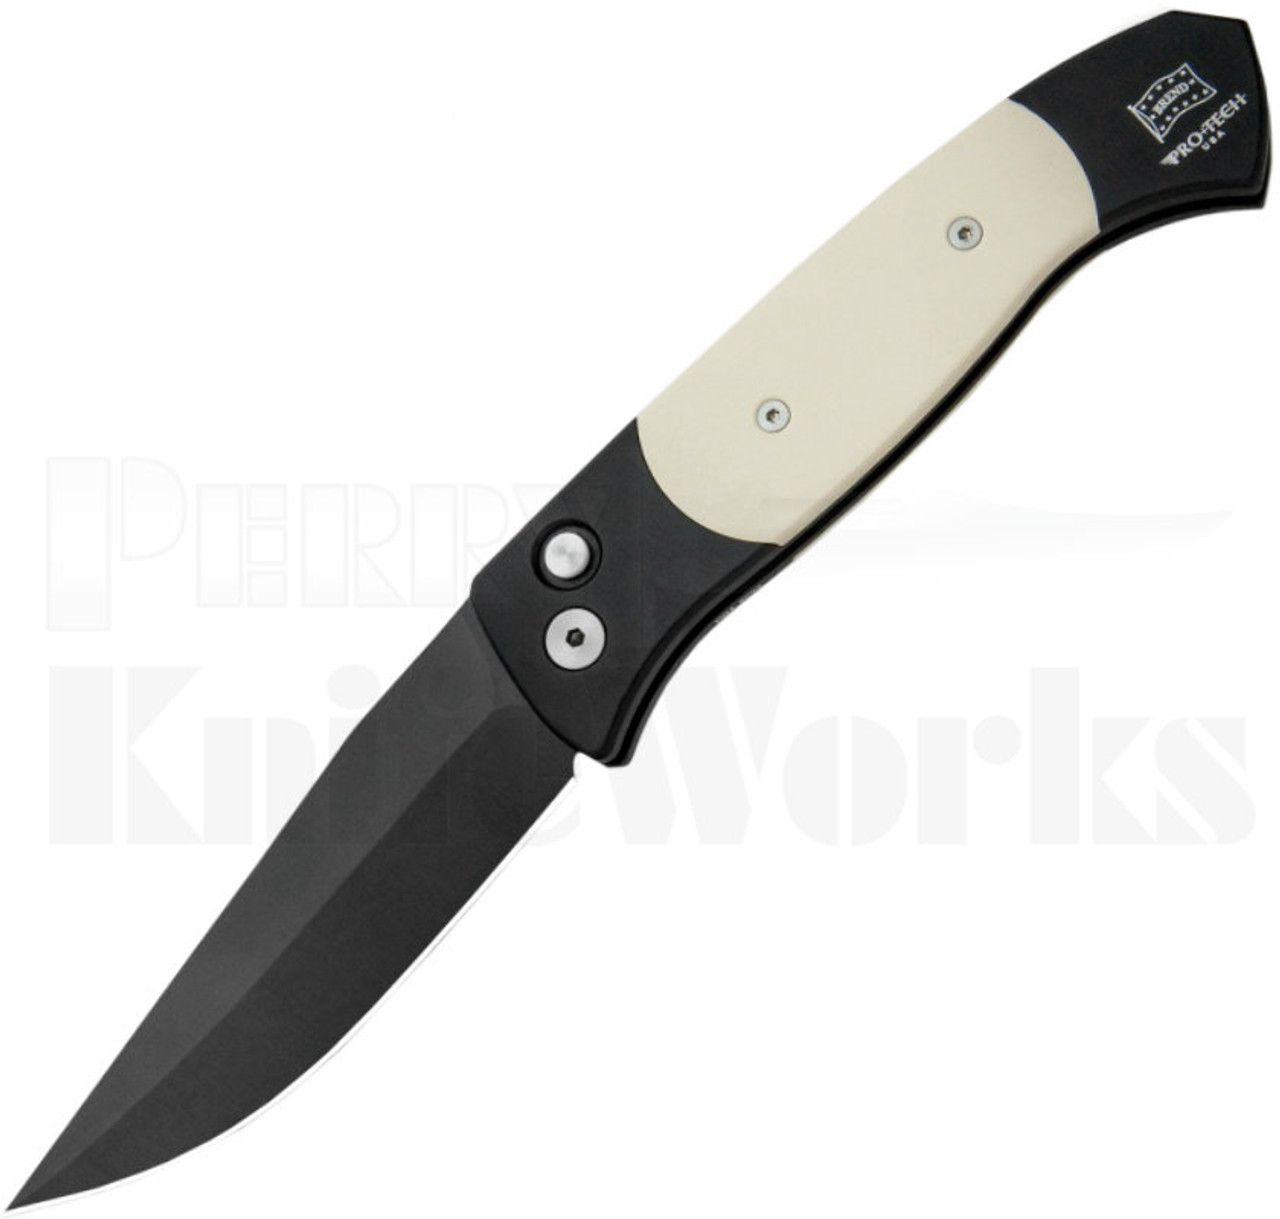 Protech Brend 3 Tuxedo Automatic Knife 1352 l Black Blade